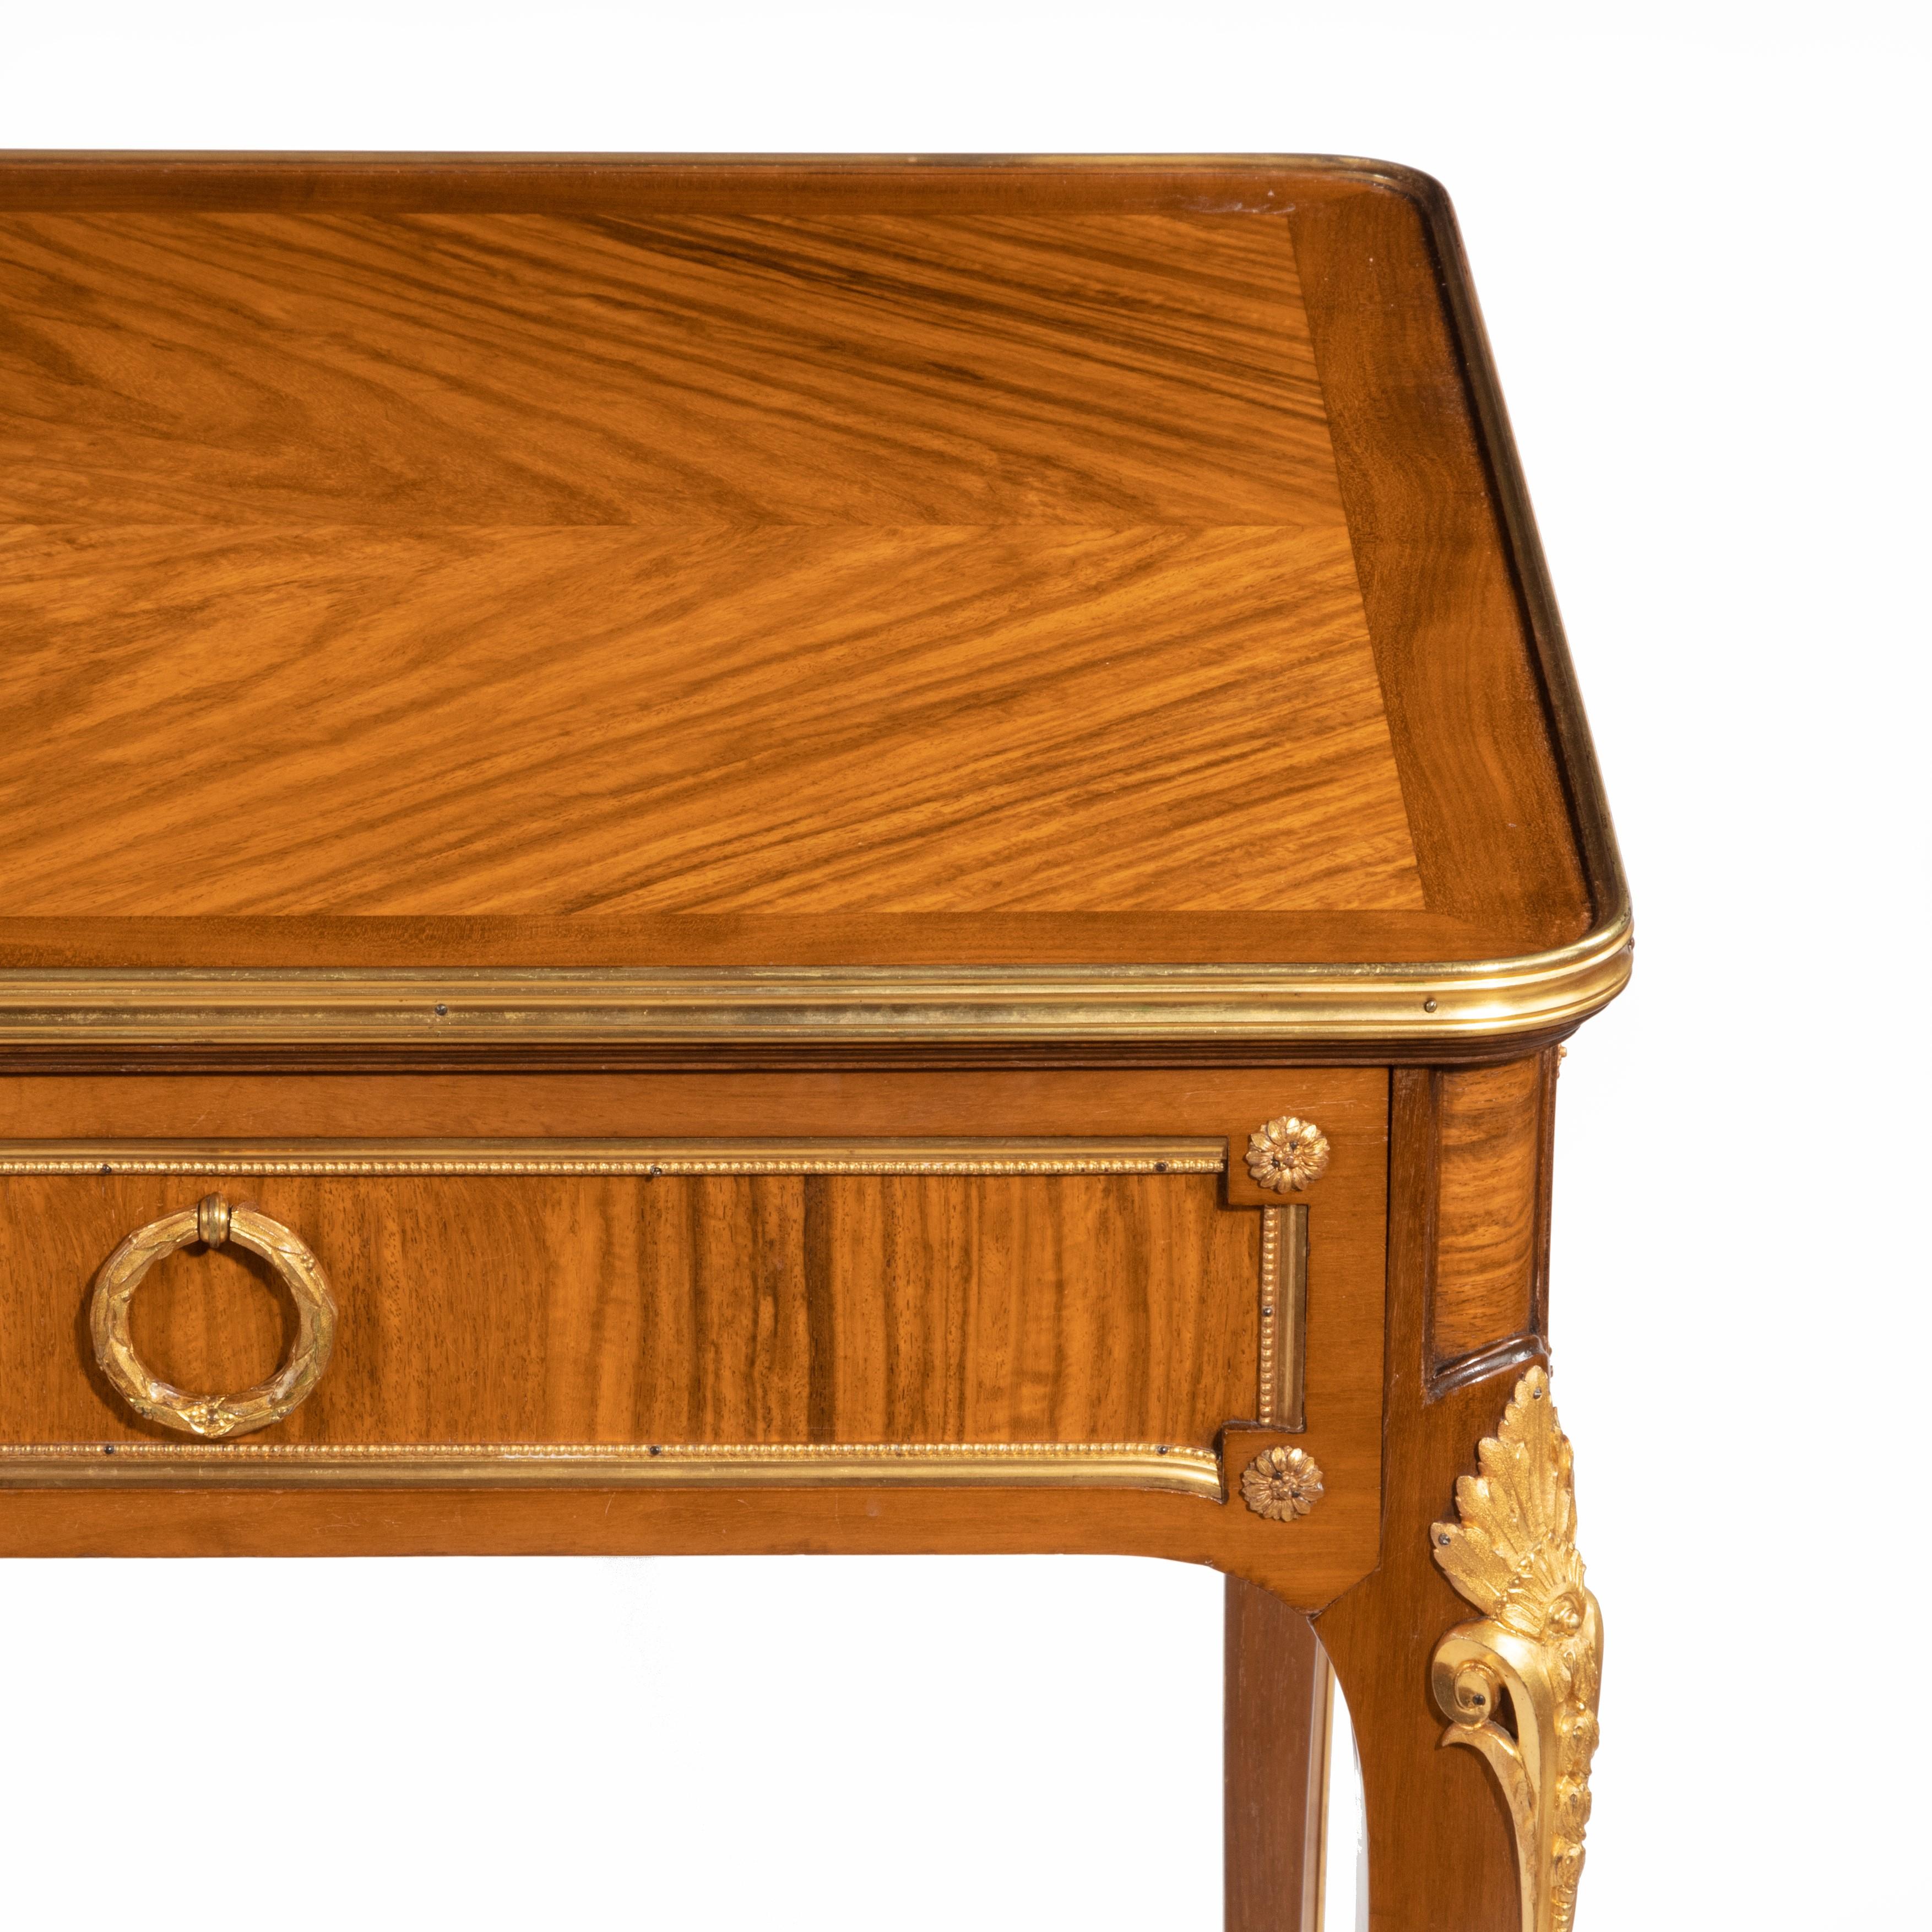 A walnut library table by Alexandre Chevrié, of rectangular form with two frieze drawers set above
slender cabriole legs, decorated with quarter veneers, mahogany banding and classical ormolu
mounts, signed ‘Chevrié á Paris’, French, circa 1880.